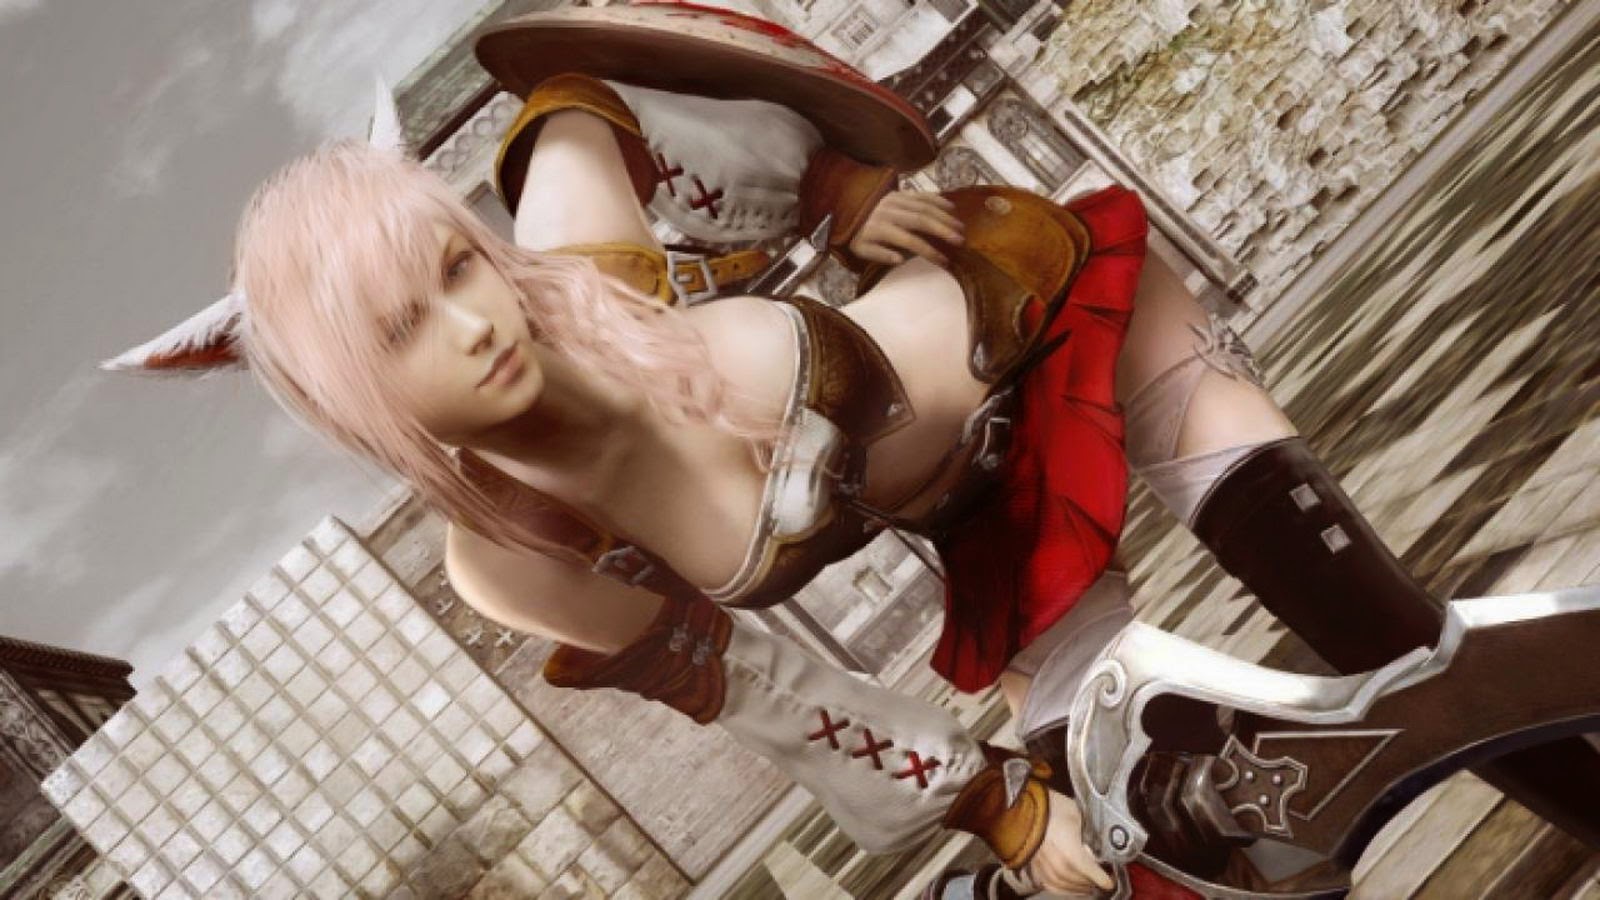 Fashion x anime: Final Fantasy's Lightning is Louis Vuitton new model - YP